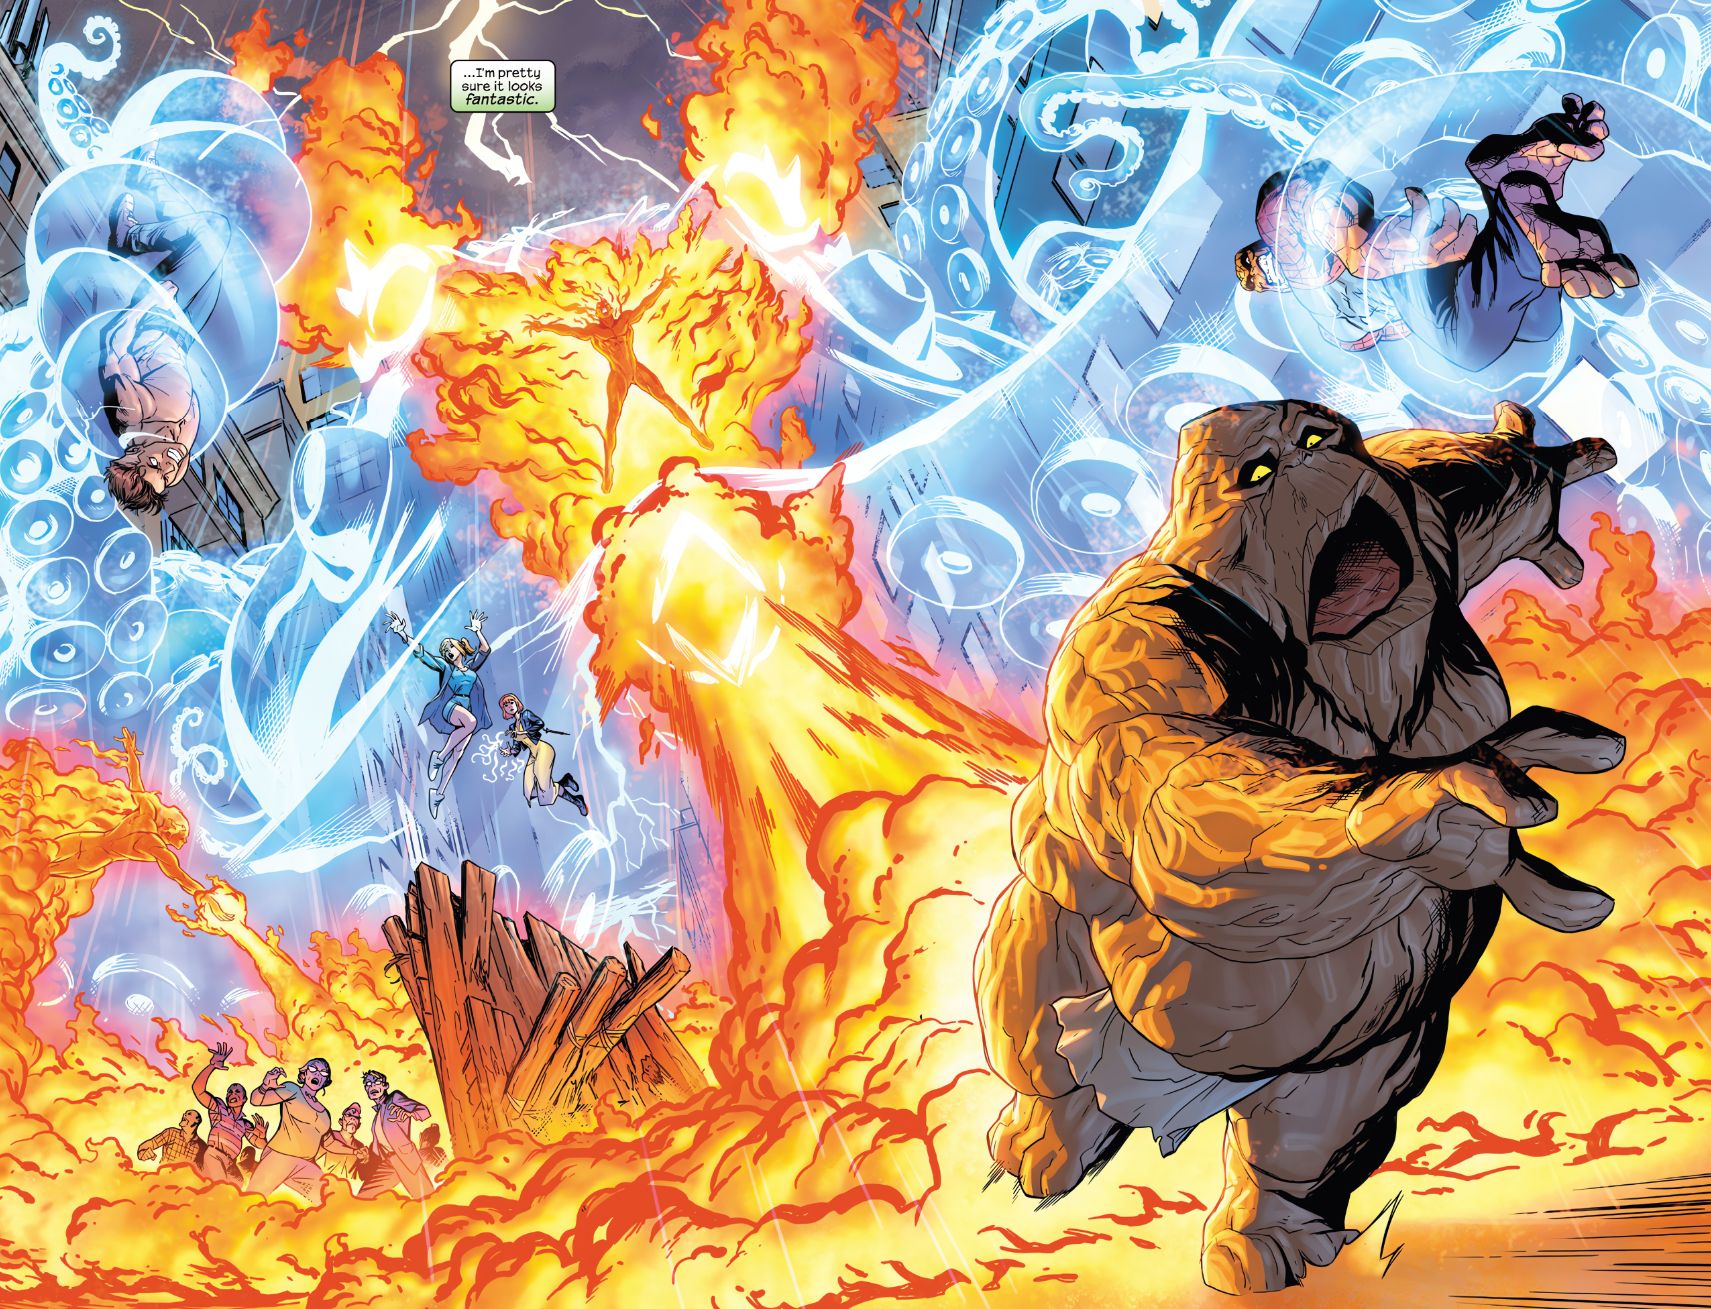 A bombastic fight scene plays out, with the Human Torch erupting gouts of flame against a terrified, blob-shaped monster while Sue holds the mind-controlled Ben and Reed in the tentacles of a giant force-field octopus. Alicia floats behind Sue, guiding her and Johnny's actions.